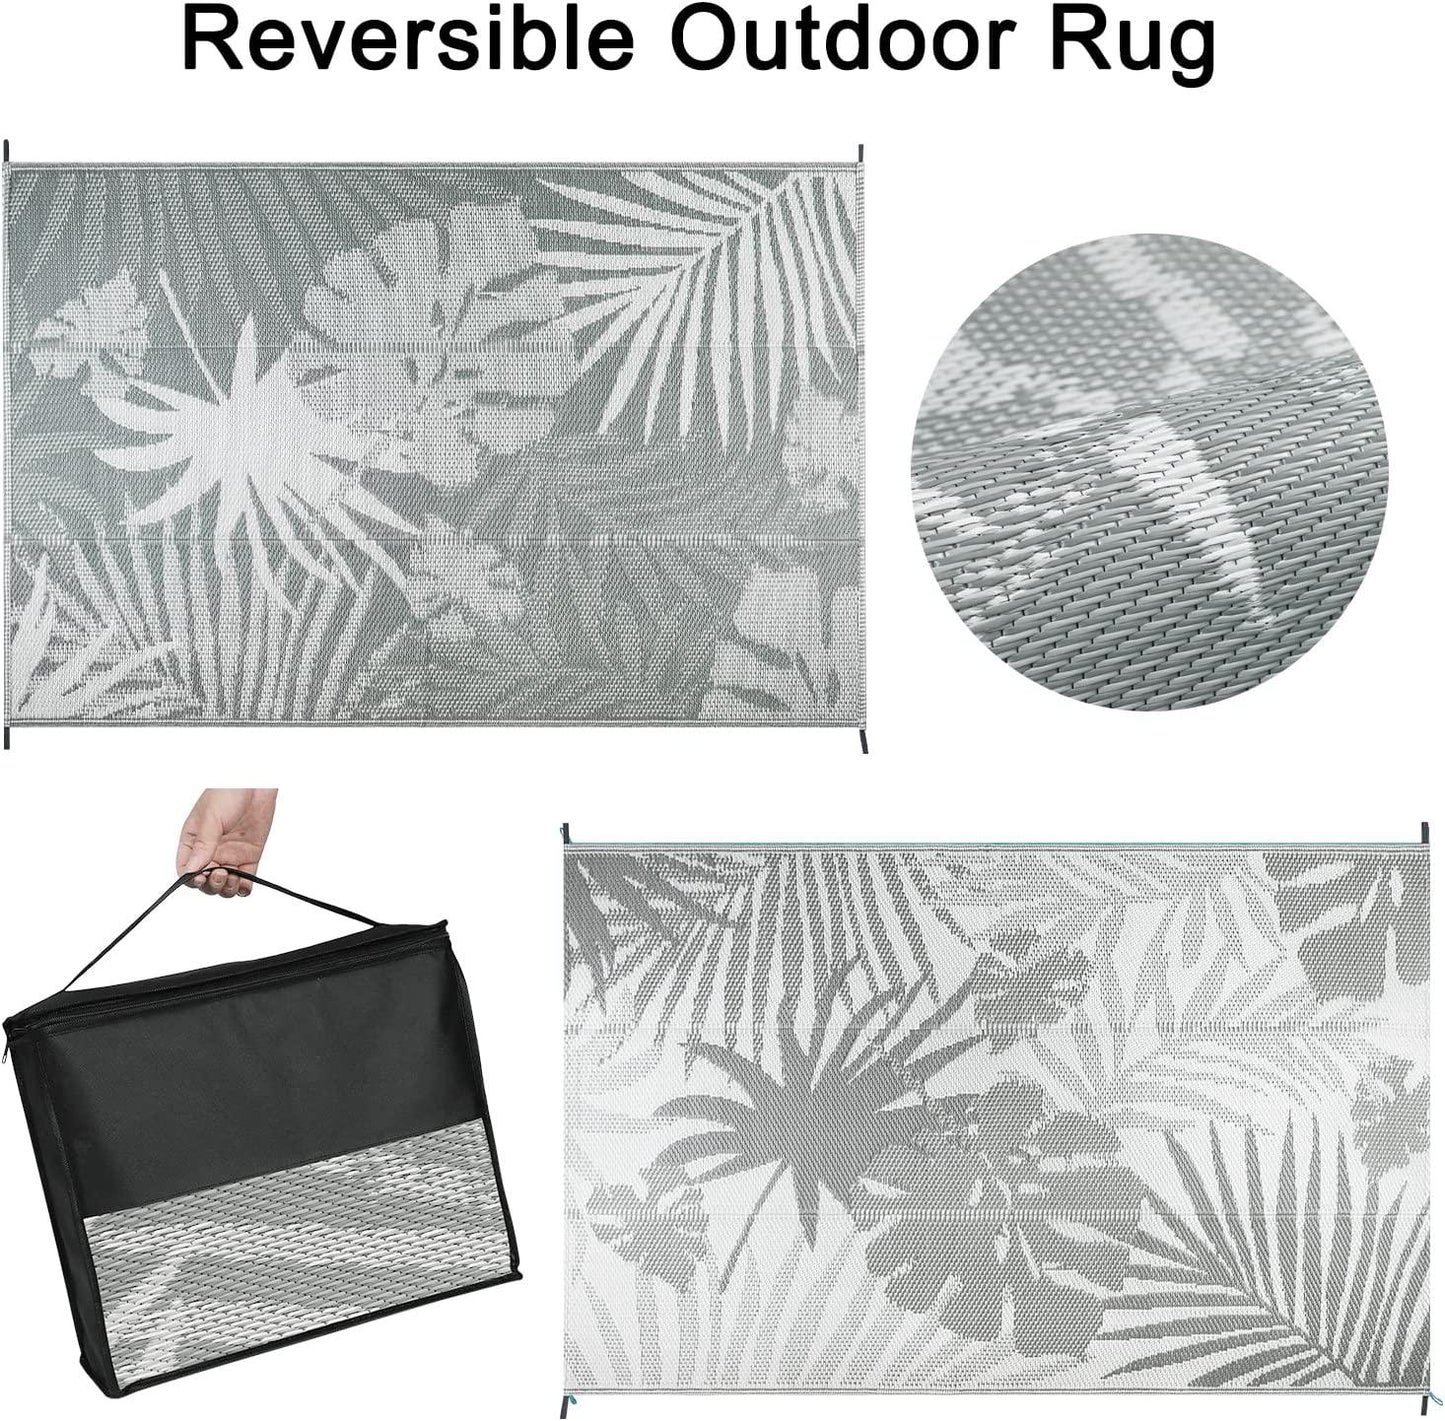 Outdoor Rugs 5 x8 Waterproo Patio Rugs Outdoor Clearance Reversible Lightweight Outdoor Rugs Portable RV Camping Mats for Tents Deck Porch BBQ Beach Backyard